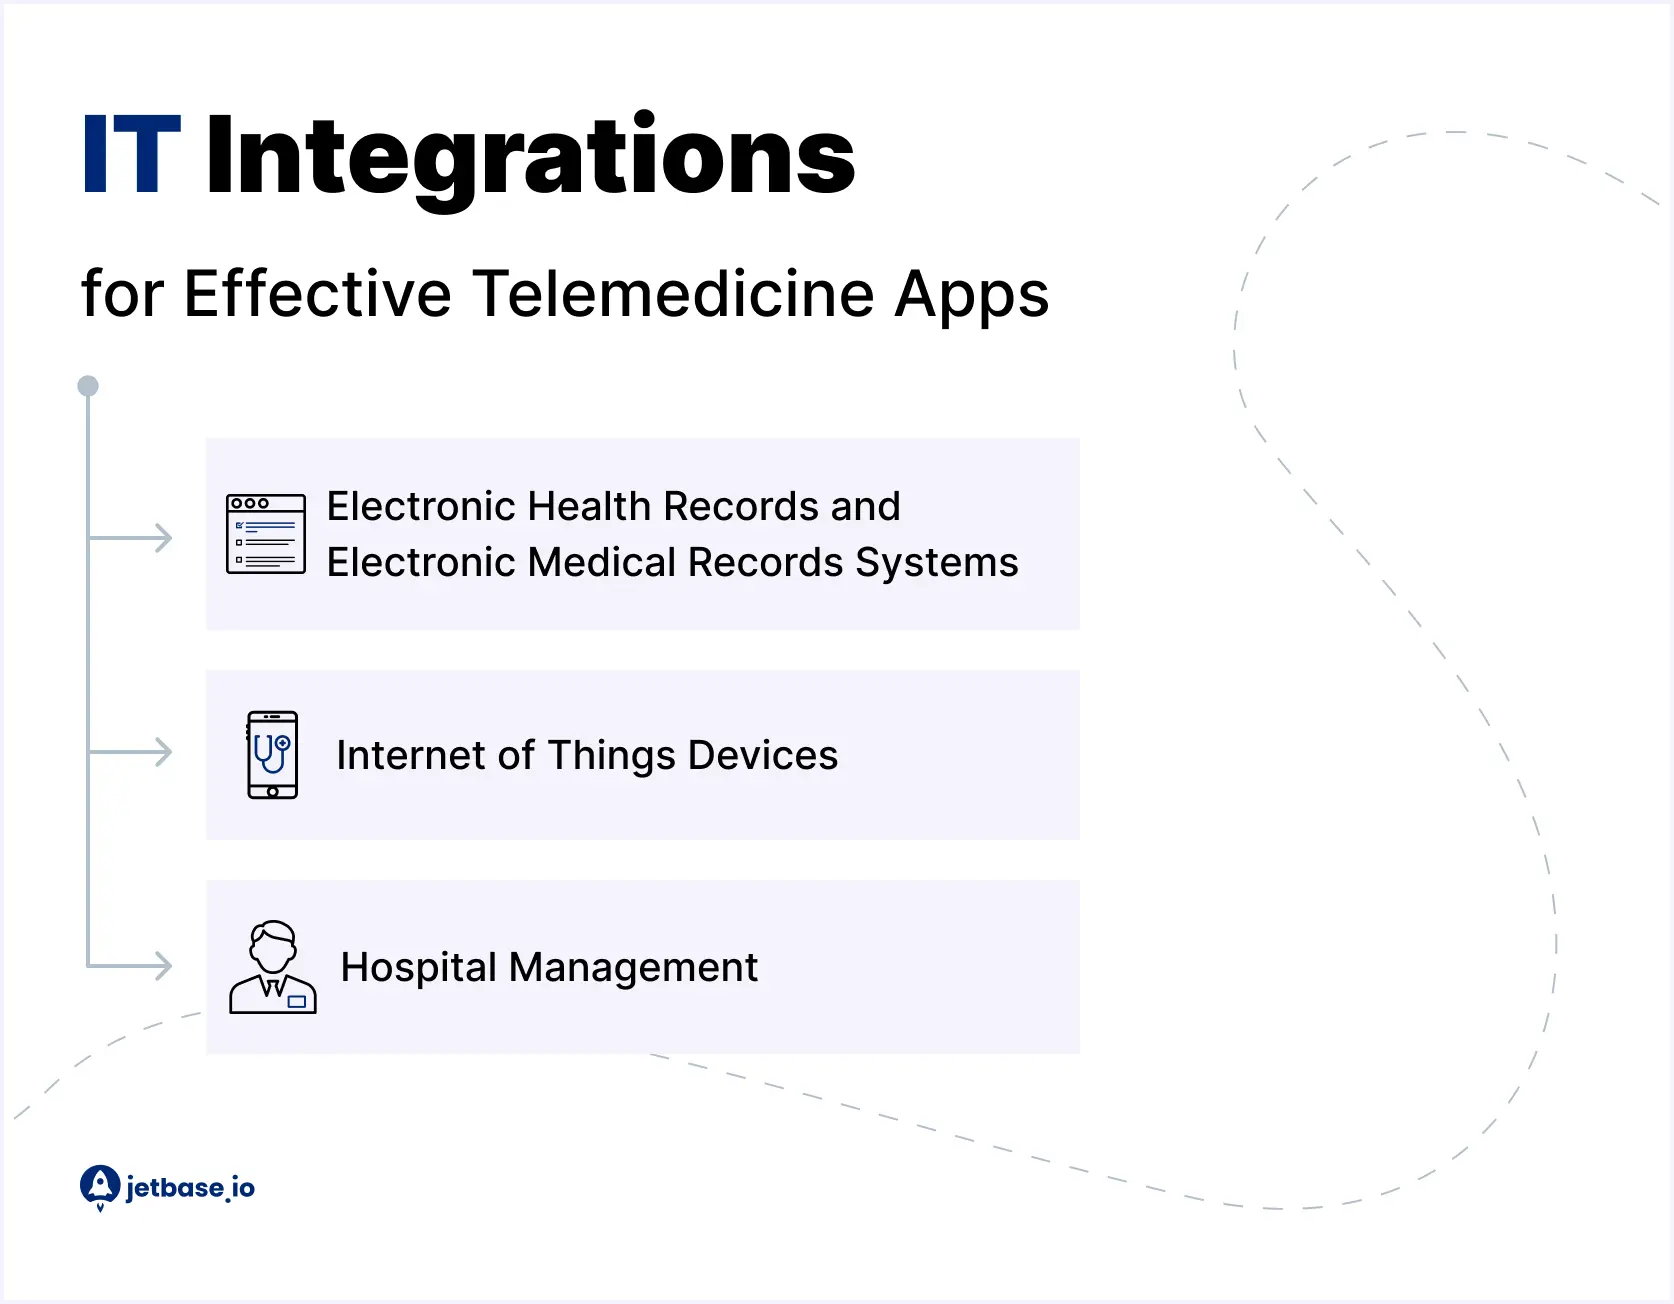 Healthcare IT Integrations for Effective Telemedicine Apps